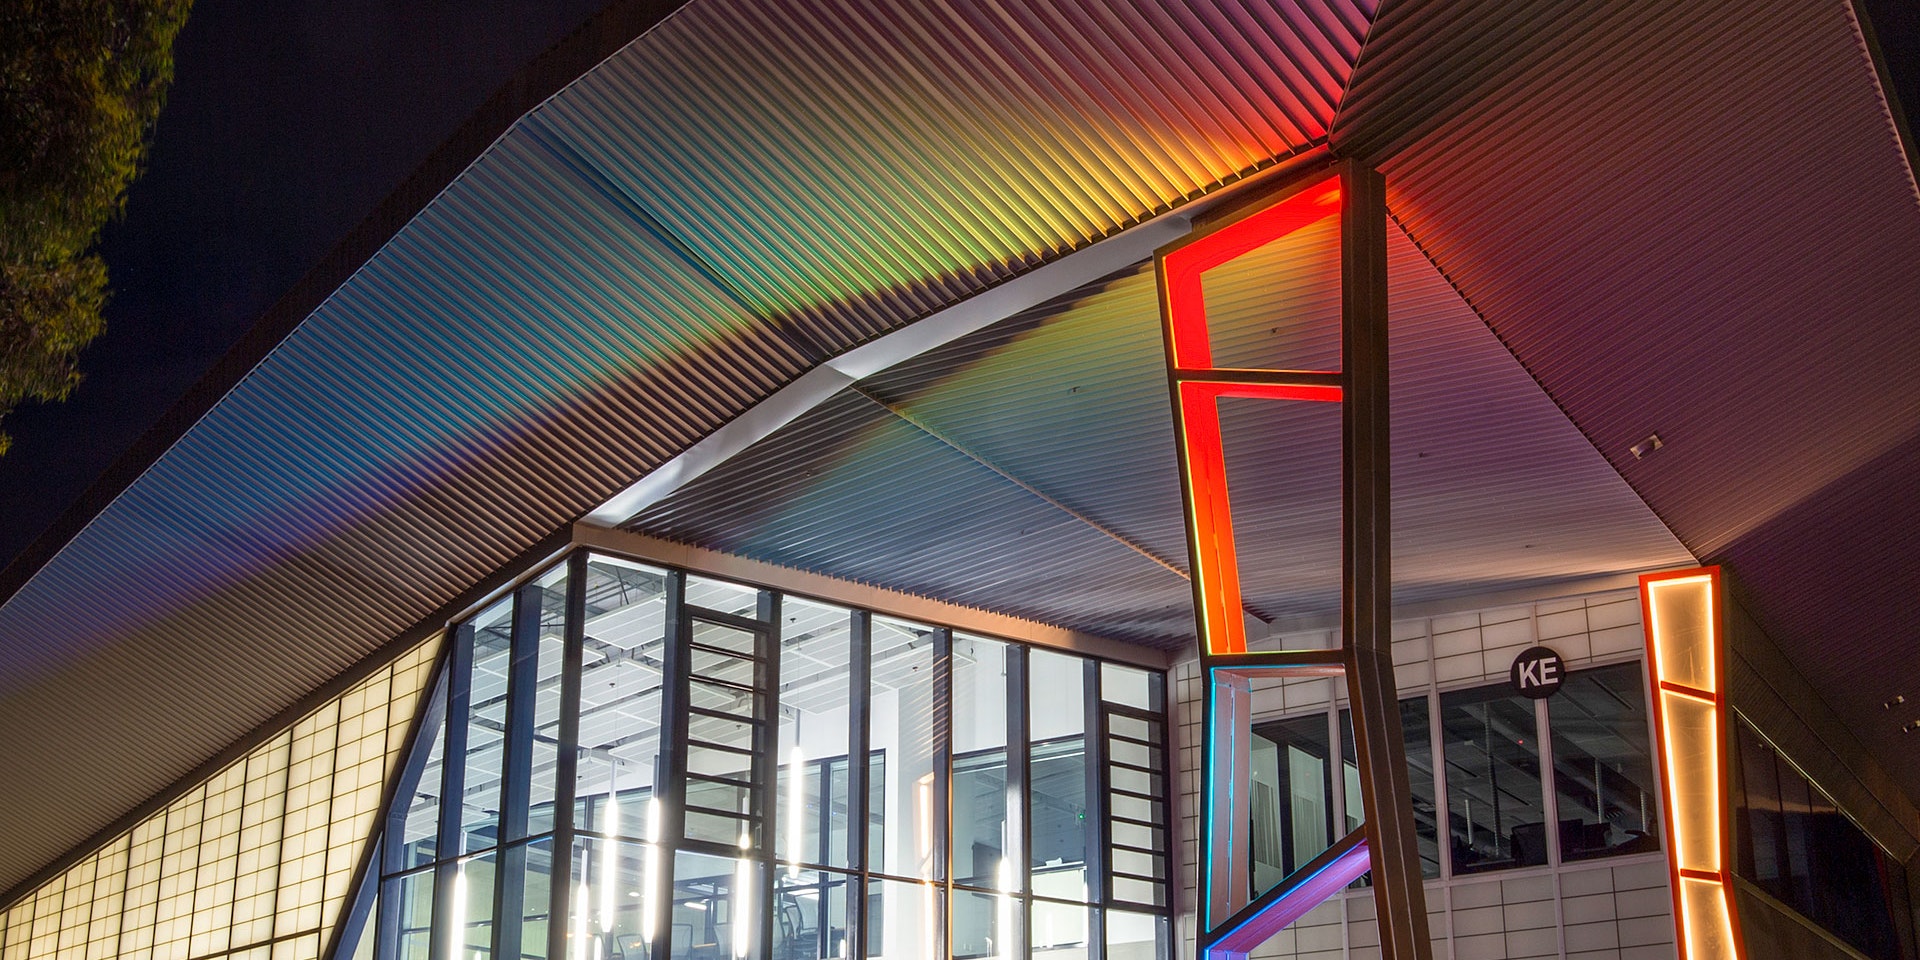 Spectrum RGB strip forms and envelops the hero column of the Deakin Cadet building. The warm tones of the other columns, provided by Multo, provide a warm and inviting atmosphere and connection to the space.